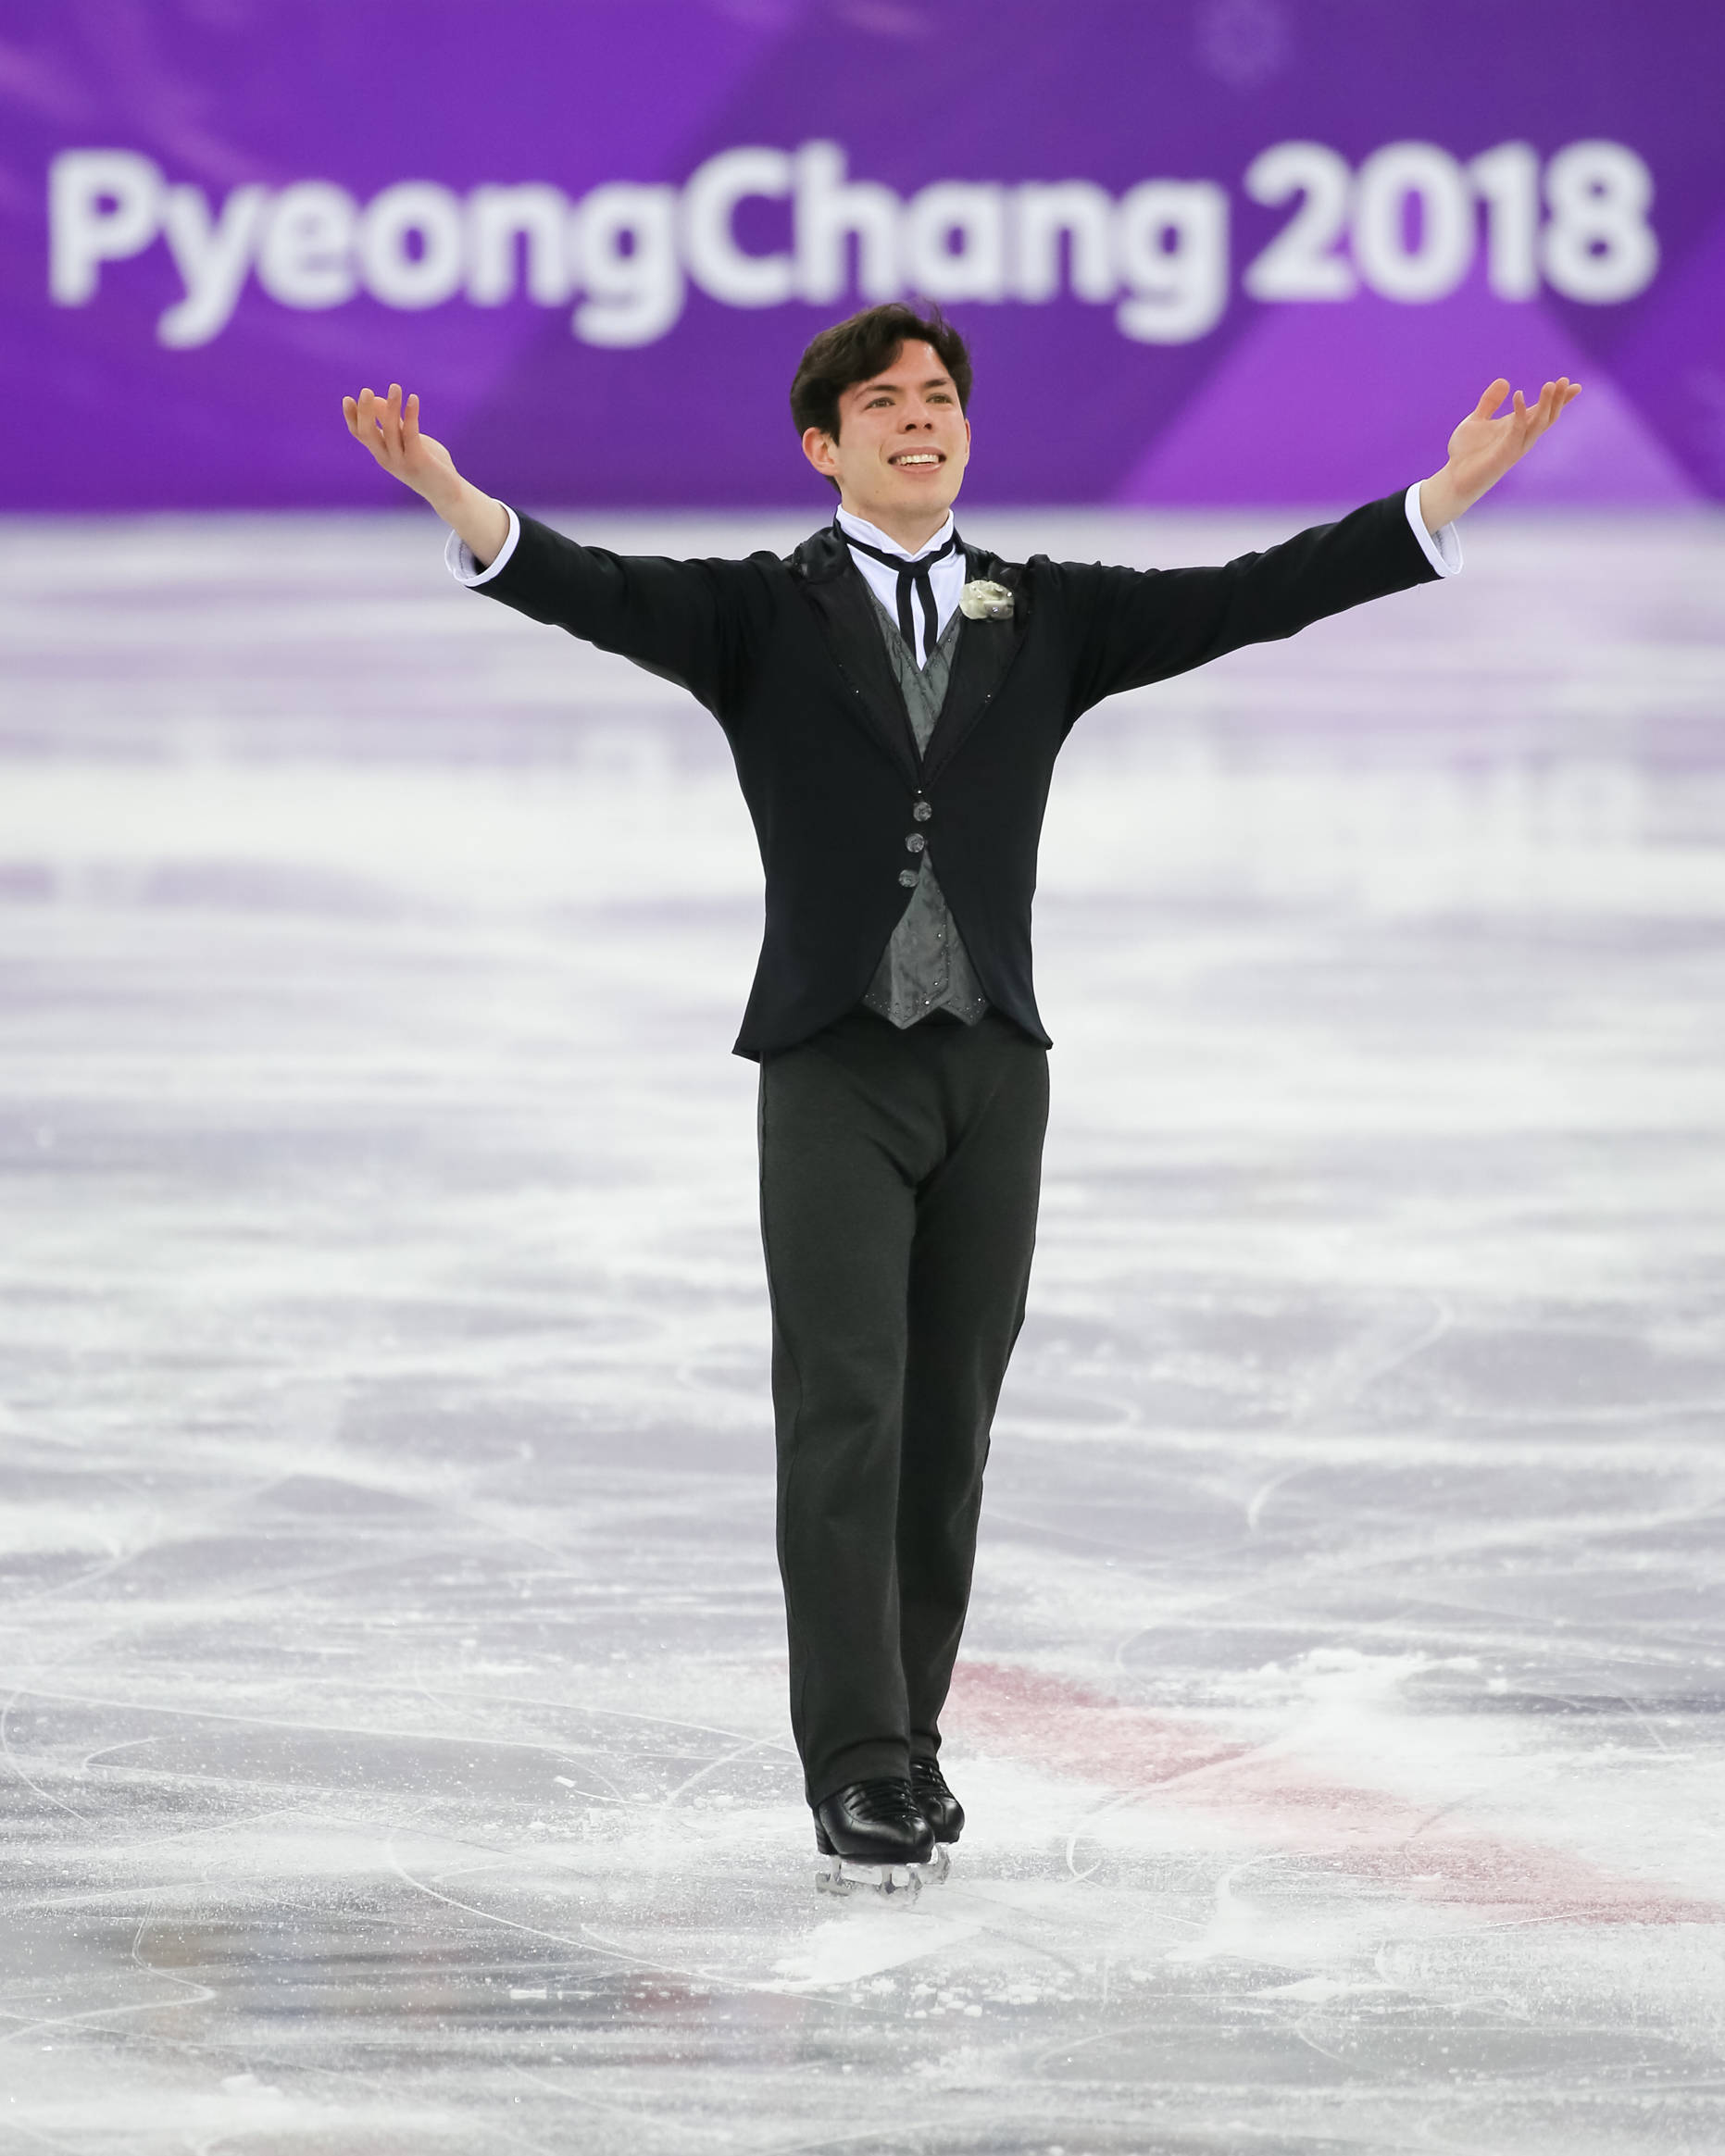 Keegan Messing gestures toward the audience while performing in men’s figure skating at the 2018 Winter Olympics, February 17, 2018. (Courtesy Photo | Greg Kolz/Keegan Messing)